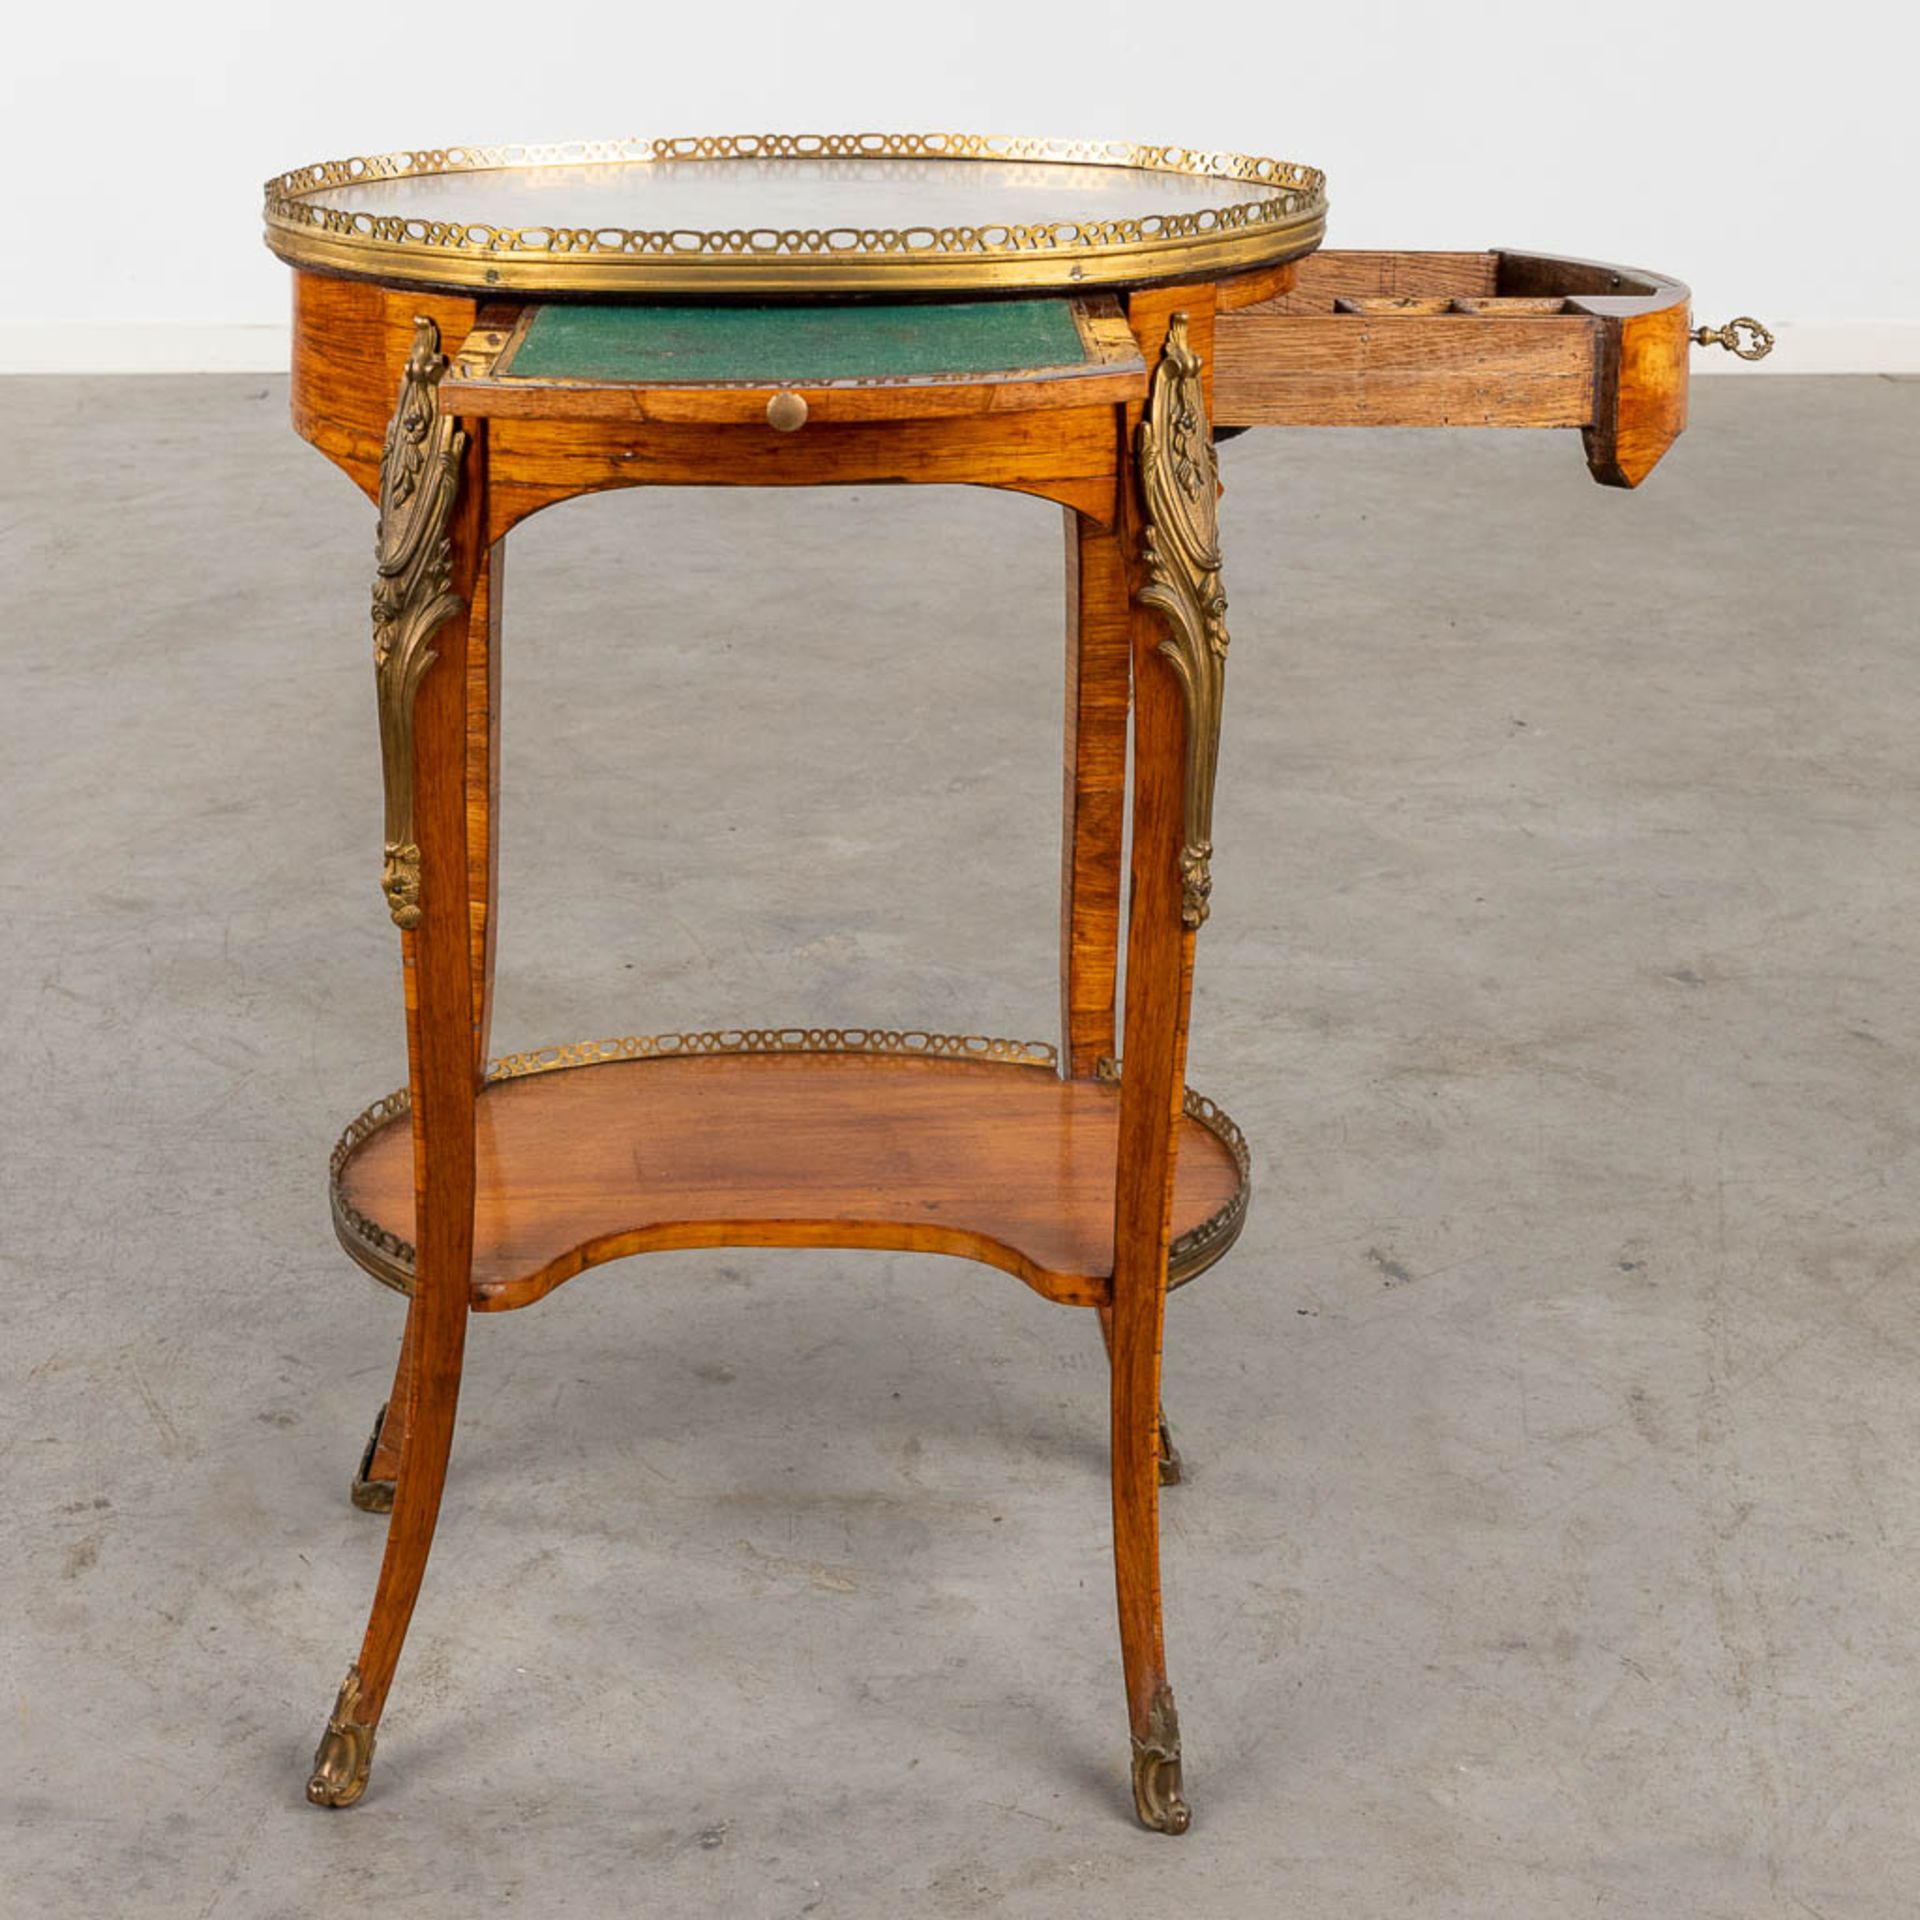 An antique side table, Louis XV, marquetry mounted with bronze and marble, 18th C. (D:38 x W:50 x H: - Image 4 of 14